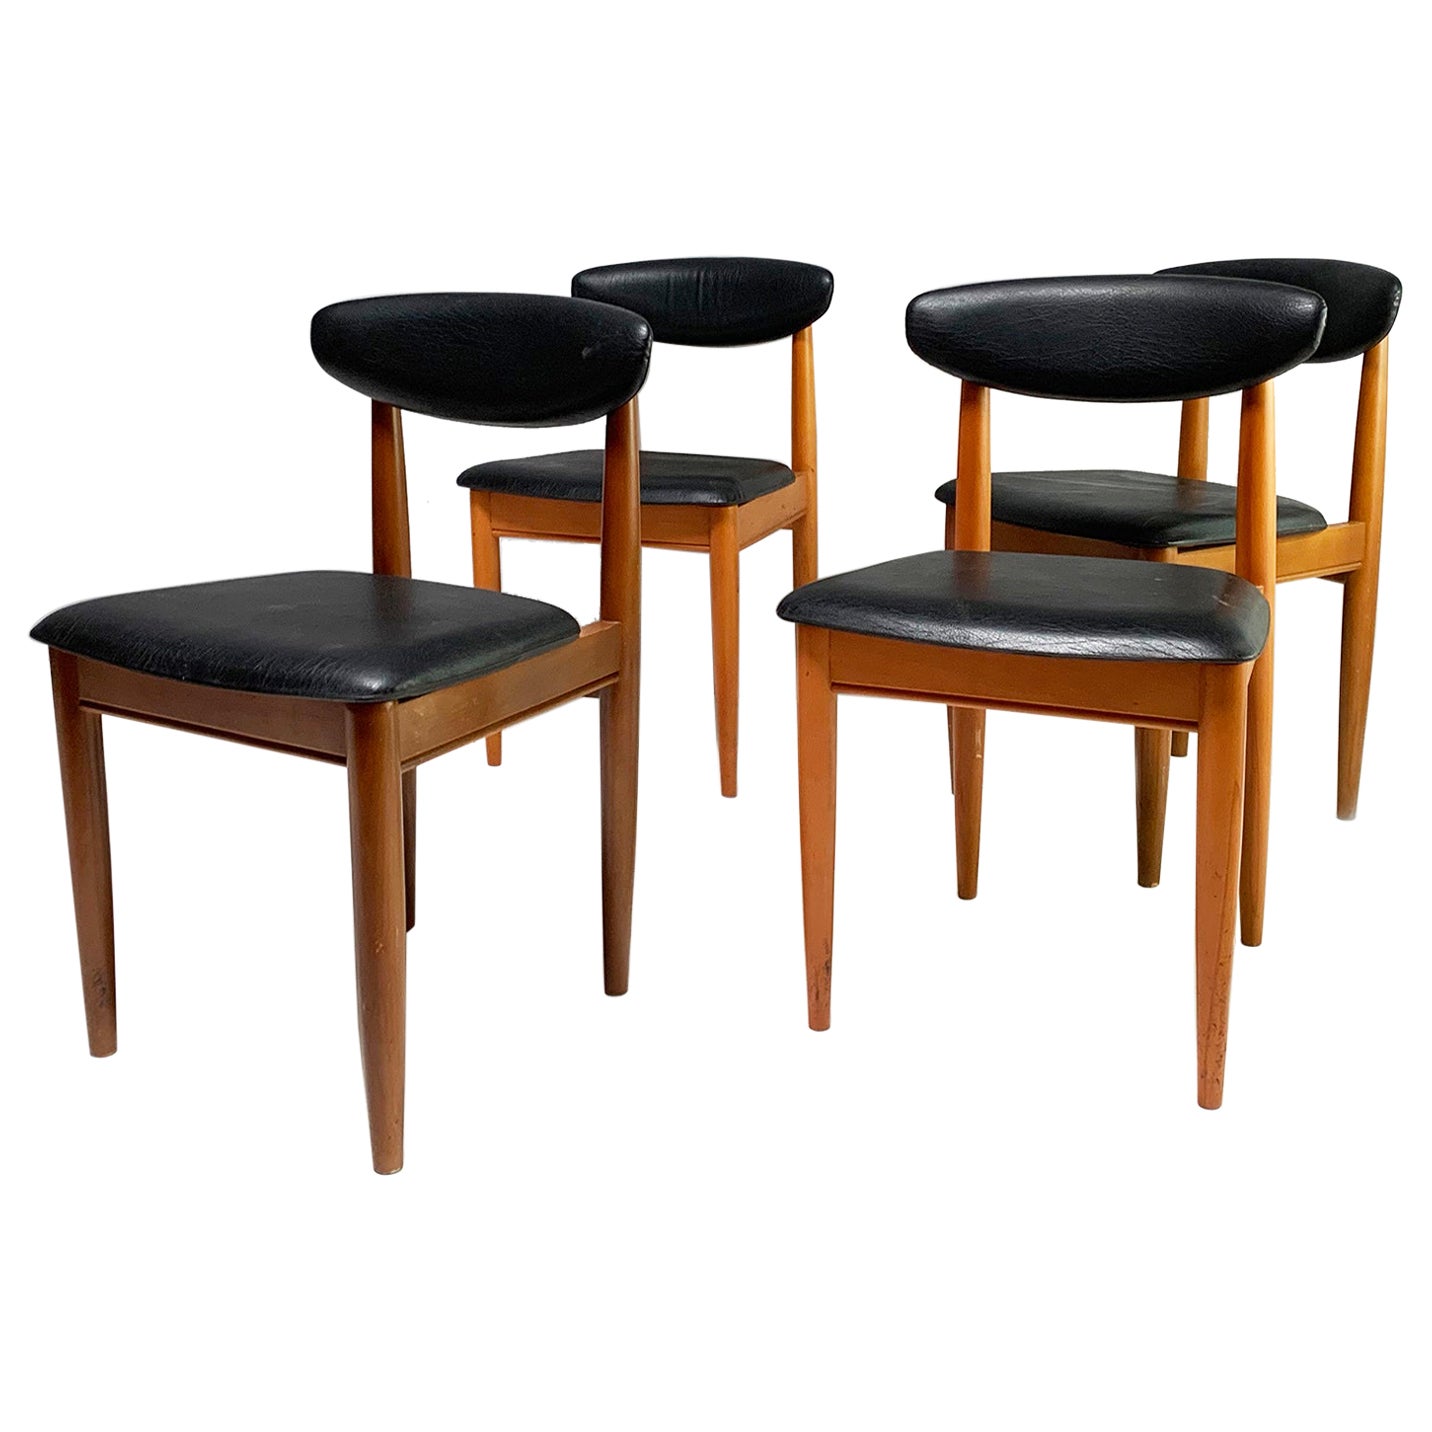 Set of 4 1970s Midcentury Dining Chairs by Schreiber